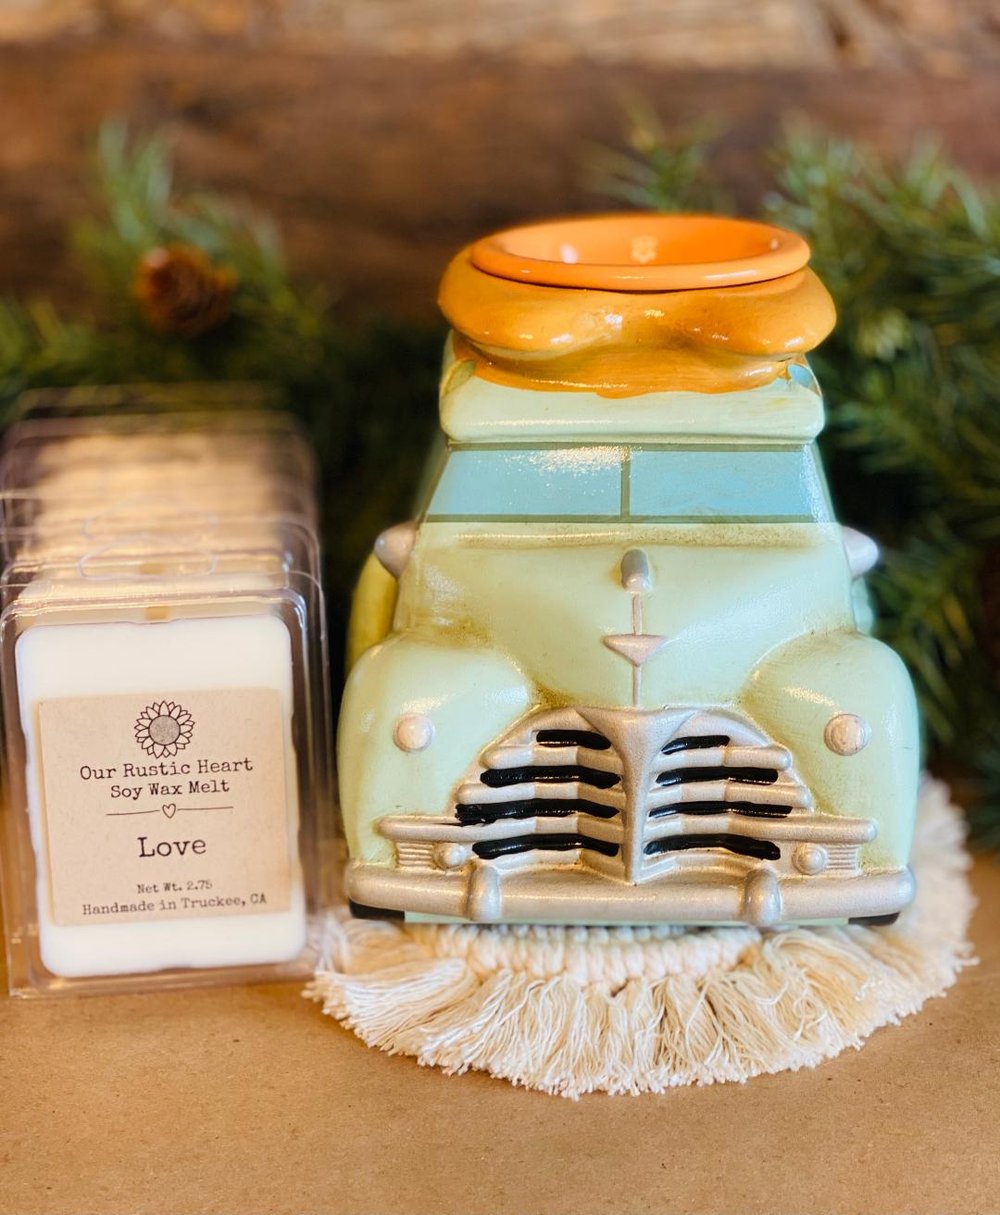 Scentsy Wax Melts – Best Friends Consignment